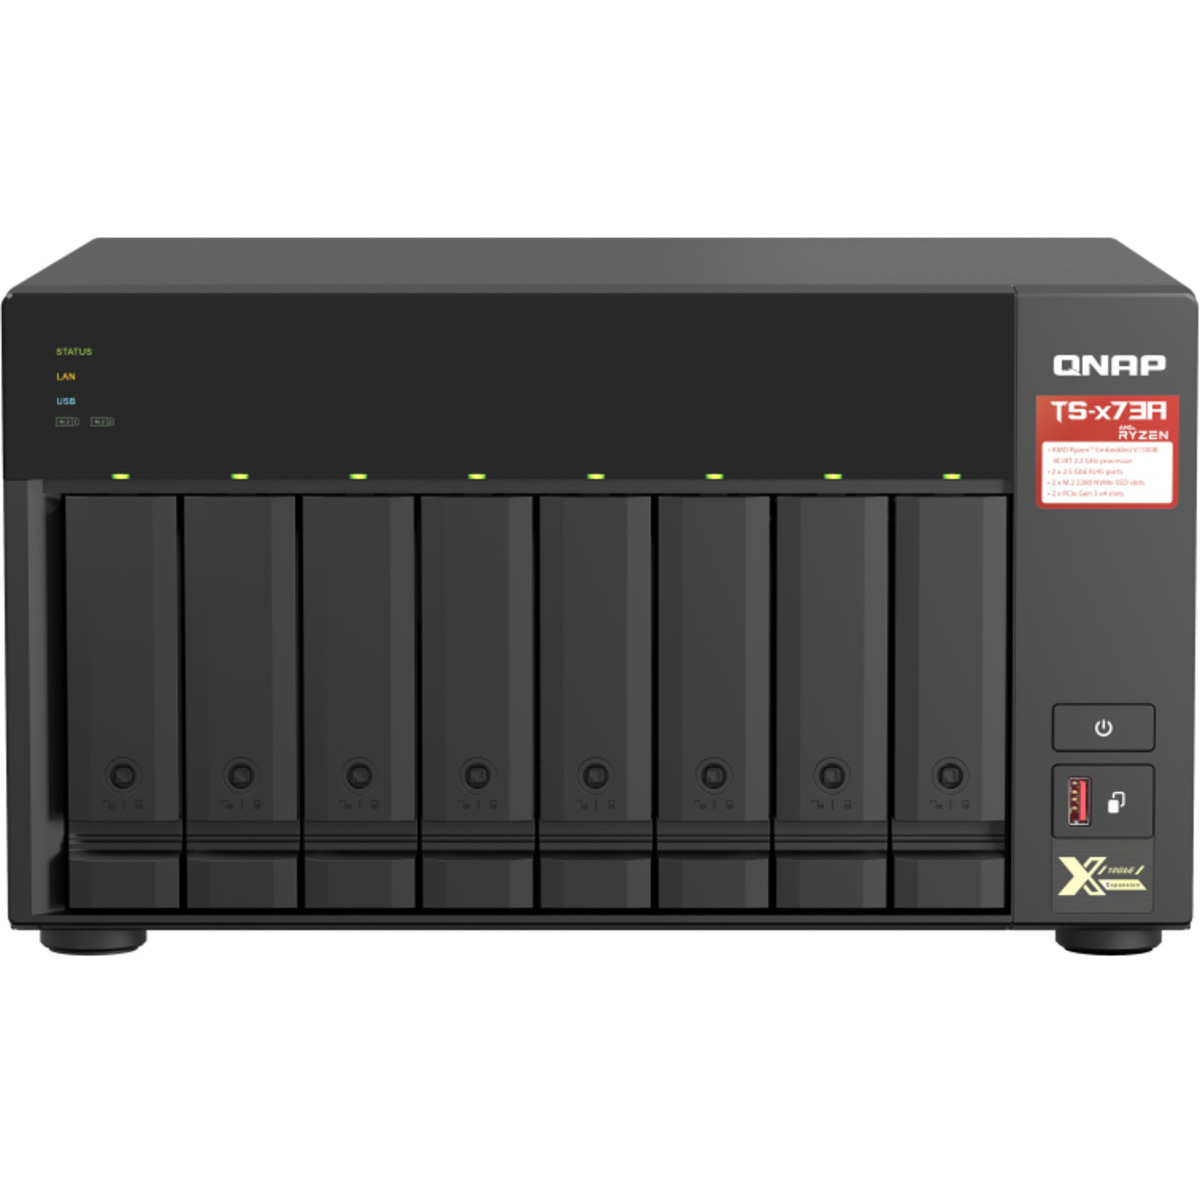 buy $1737 QNAP TS-873A 16tb Desktop NAS - Network Attached Storage Device 8x2000gb Seagate BarraCuda ST2000DM008 3.5 7200rpm SATA 6Gb/s HDD CONSUMER Class Drives Installed - Burn-In Tested - ON SALE - nas headquarters buy network attached storage server device das new raid-5 free shipping usa TS-873A